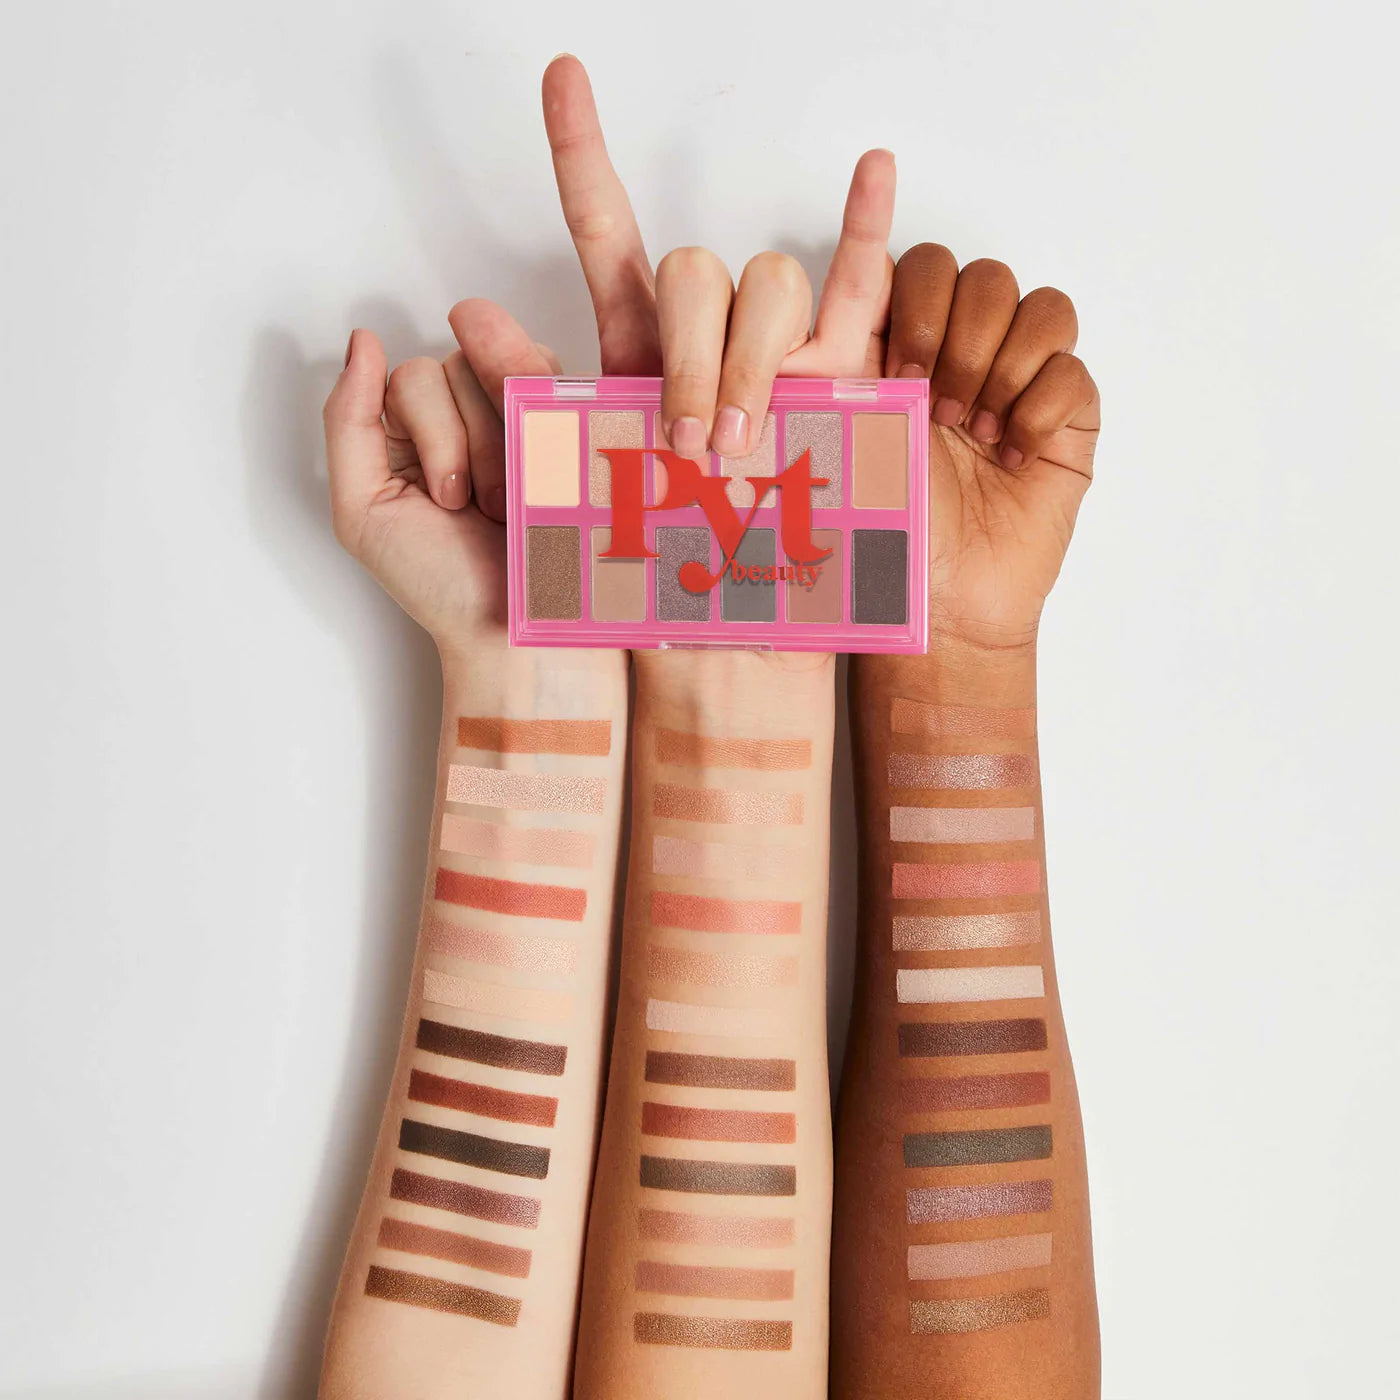 The-Upcycle-Eyeshadow-Palette-Cool-Crew-Nude_02_700x_2x_6c9fc556-0351-43a7-8d51-7a7cd6a761fa.webp